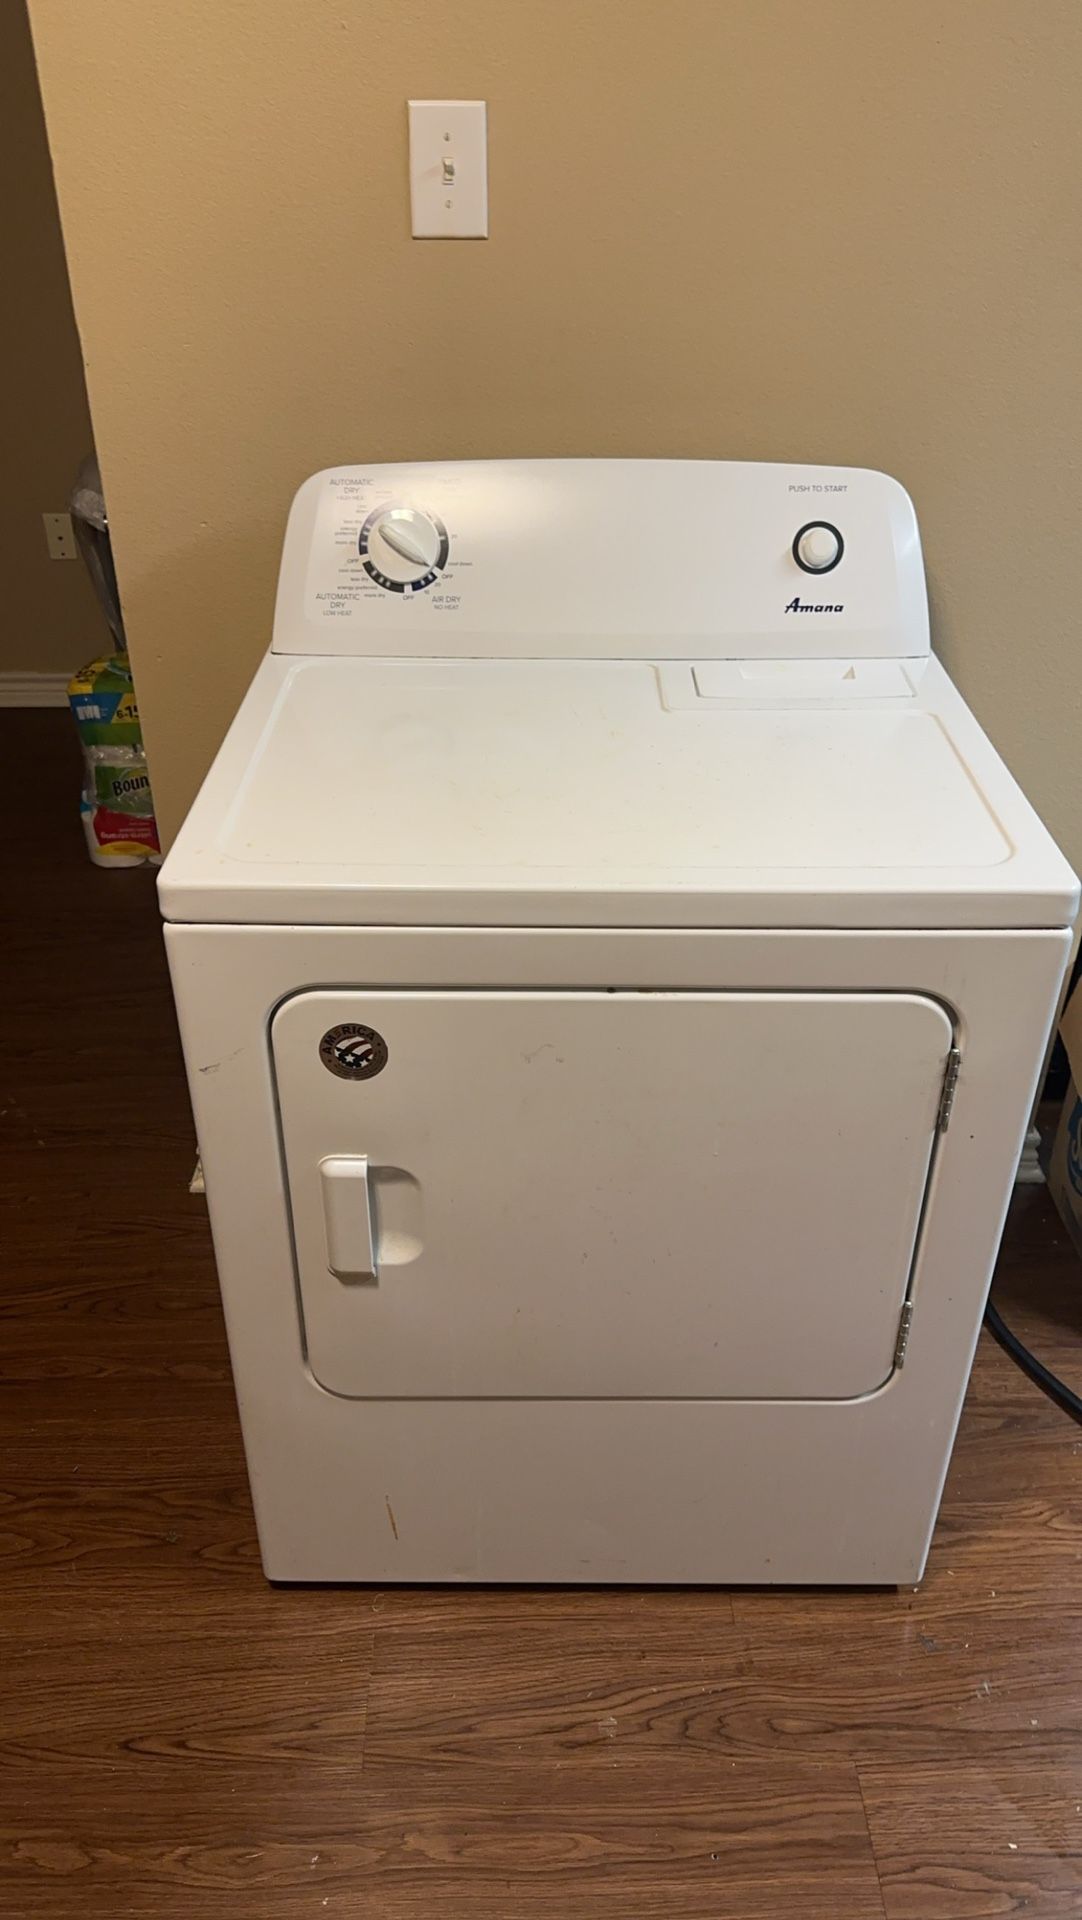 Washer & Dryer For Sell Nothing Isn’t Wrong  with It It’s Like New I Can’t Use It In My Apartment Cause We Have Stackes So I Just Want It Gone